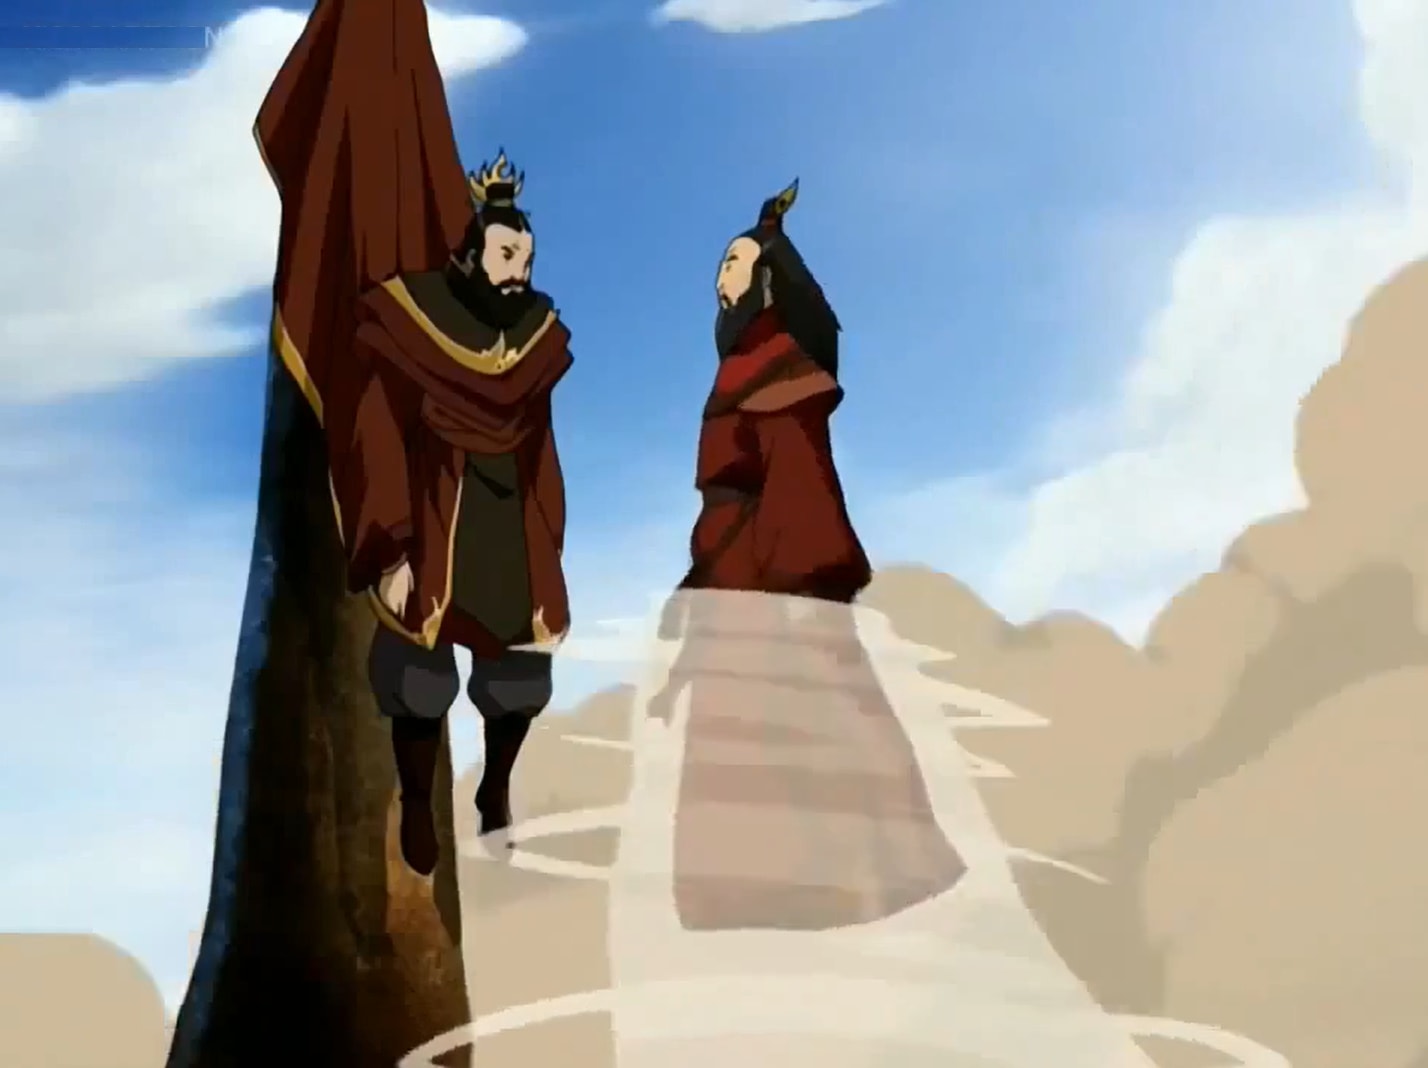 This is probably just a stretch or already pointed out but I just noticed that in this scene, Roku, suspended by Air, was trying to avoid conflict by sparing Sozin, while Sozin, suspended by Earth, was firm until the end with his vision. The two elements nicely symbolize their differences.